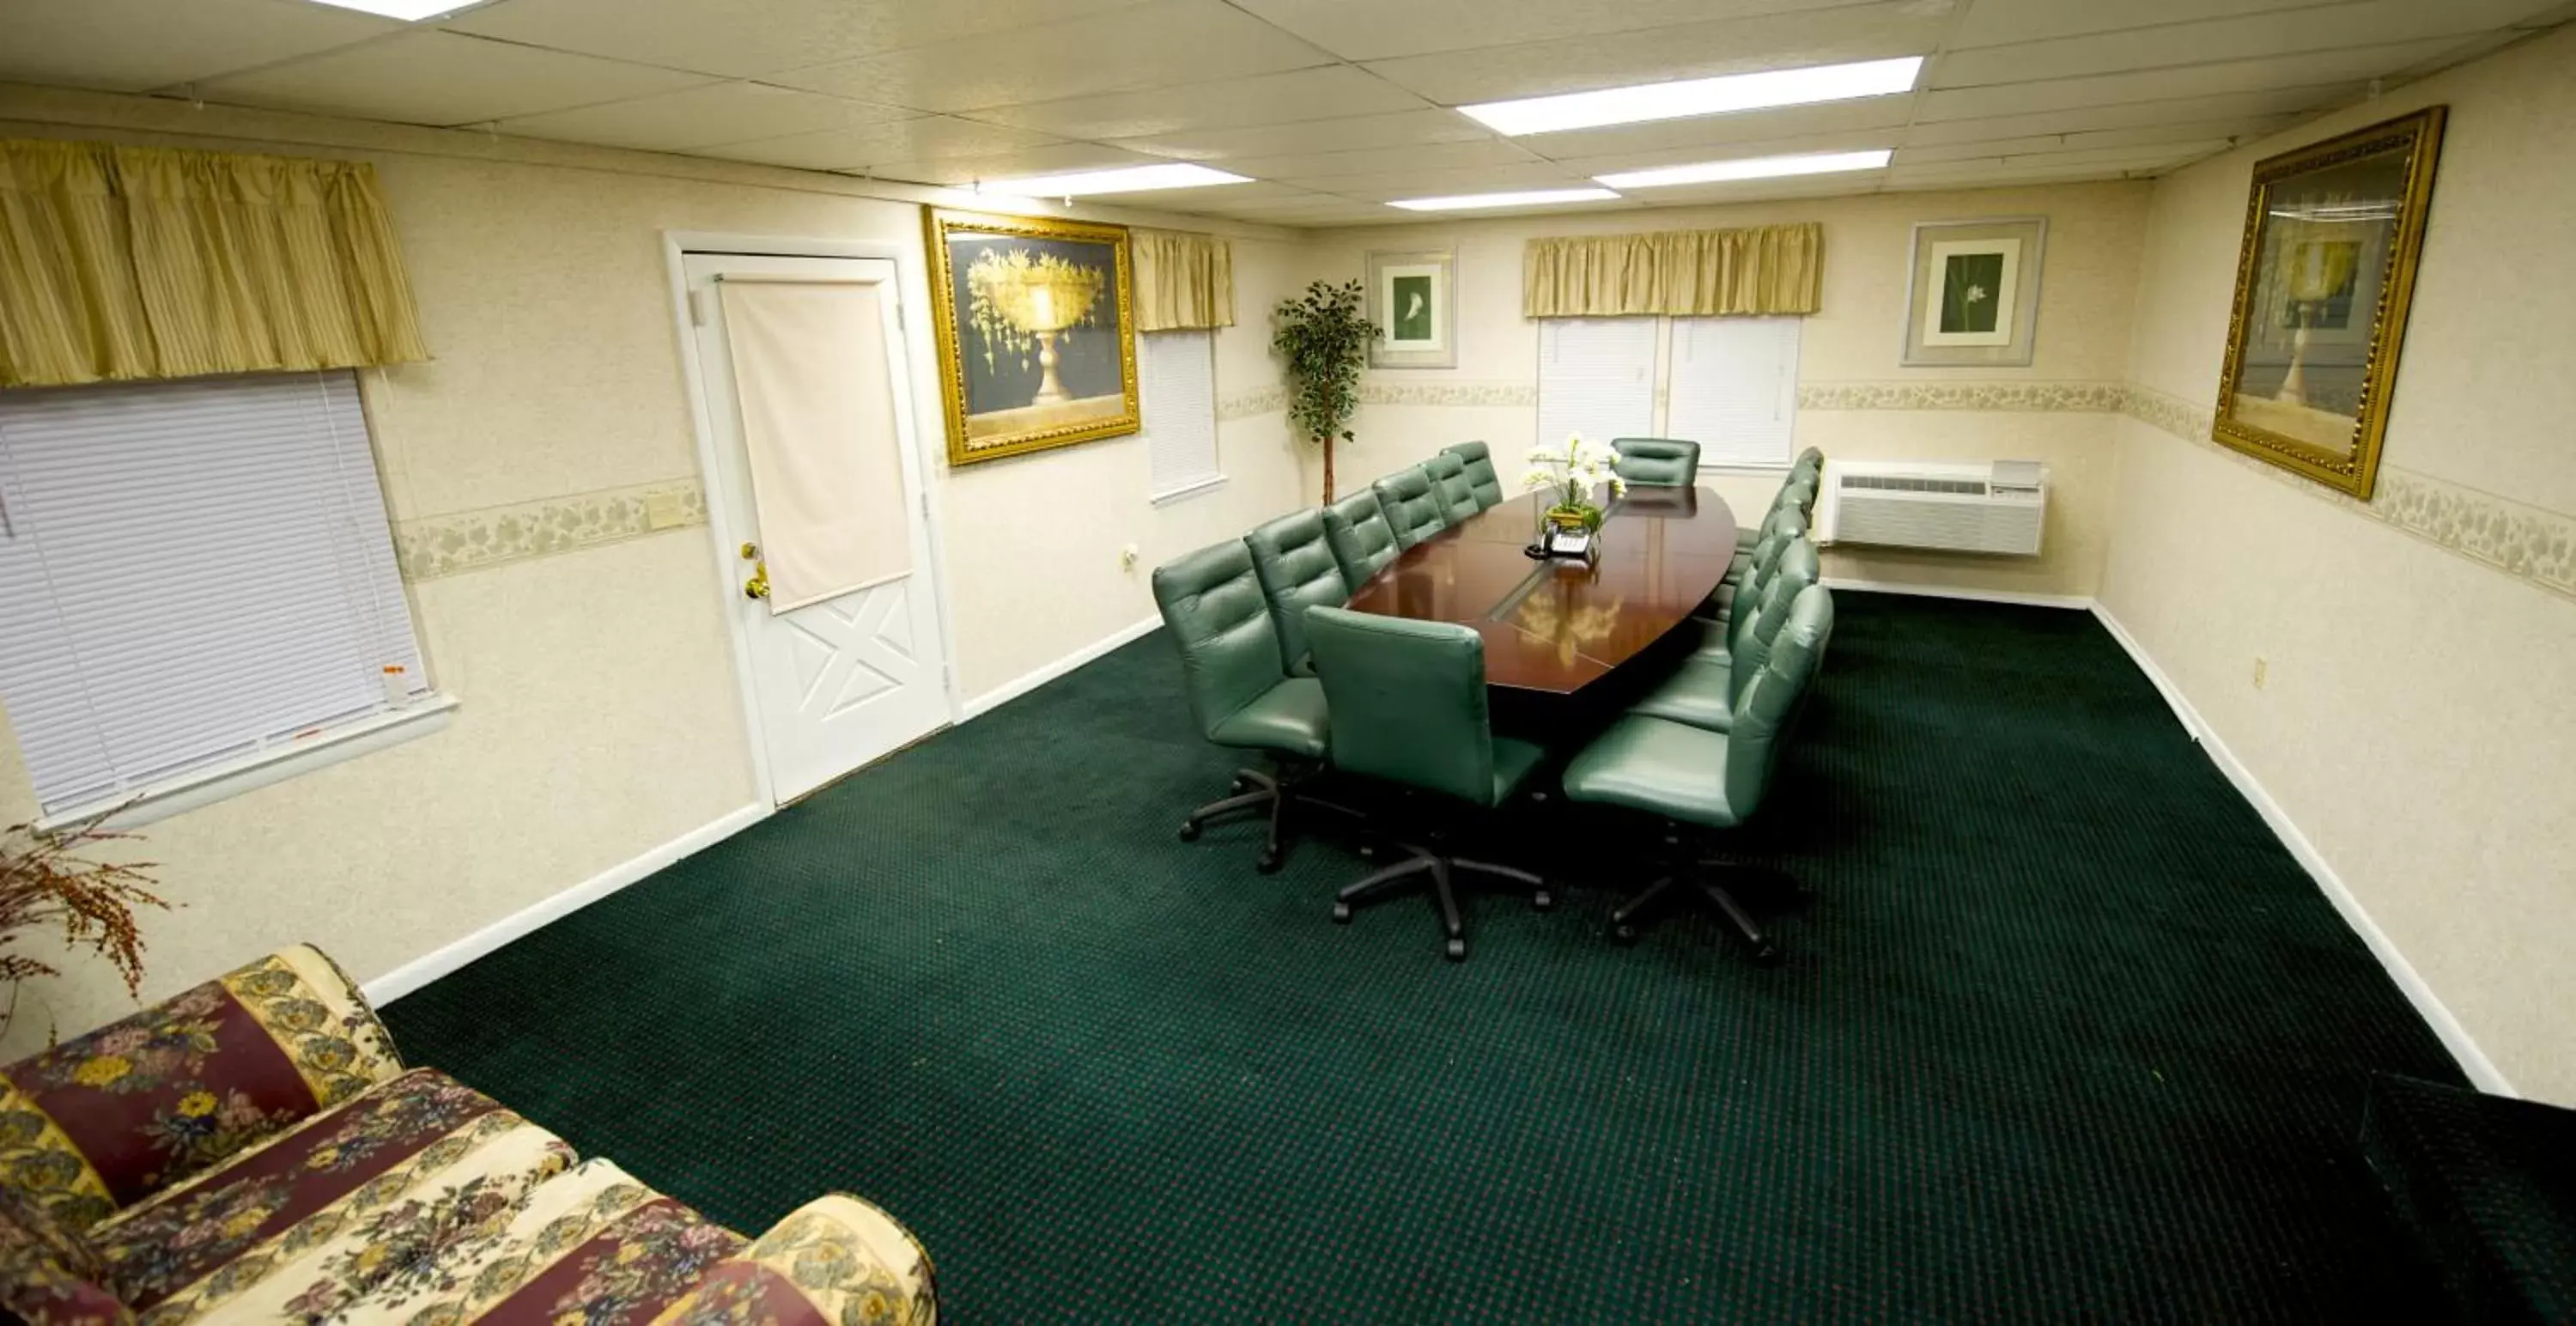 Meeting/conference room in Executive Inn & Suites Upper Marlboro